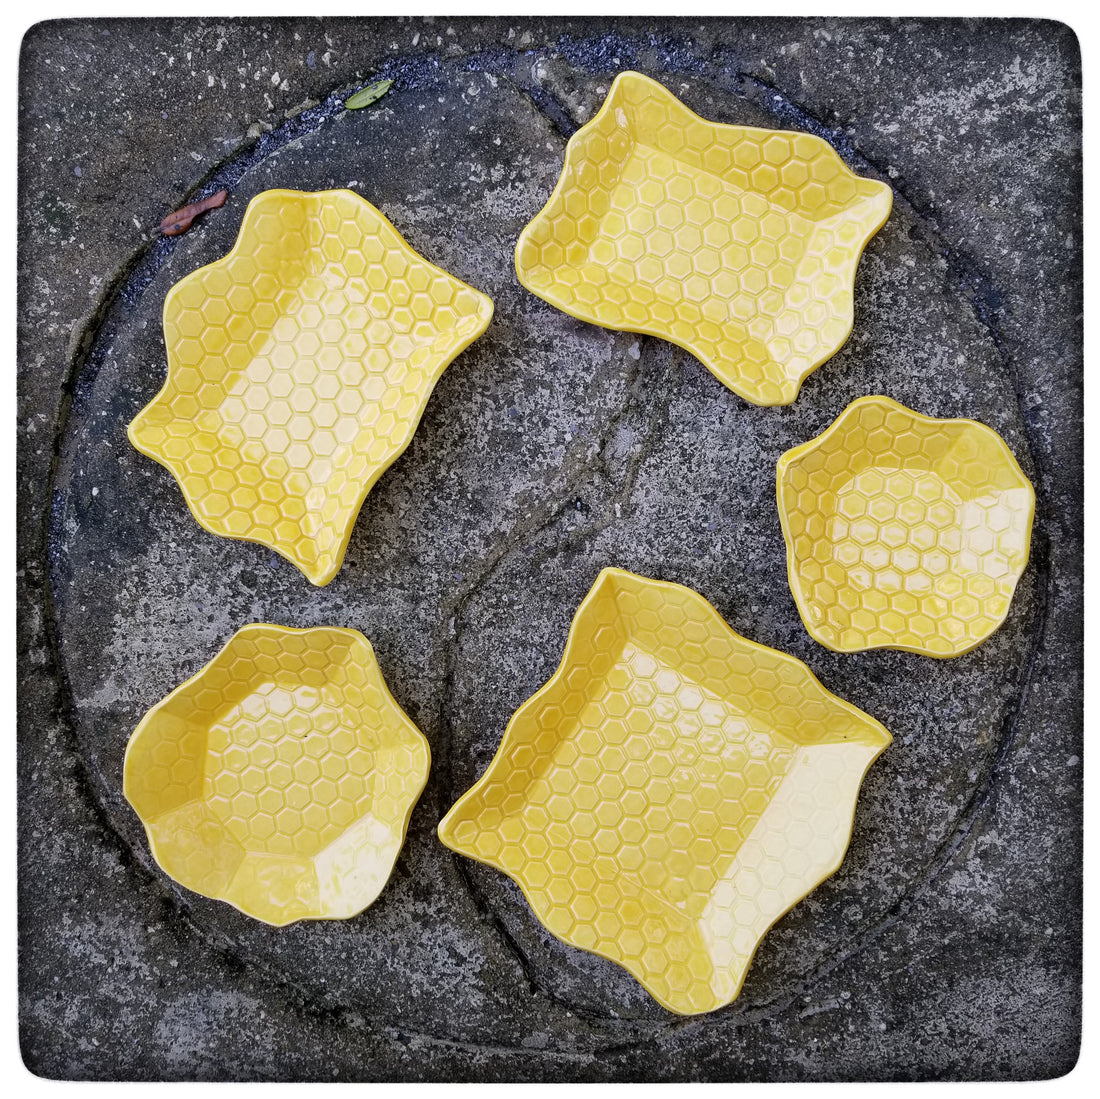 New in the shop: The Honeycomb Collection